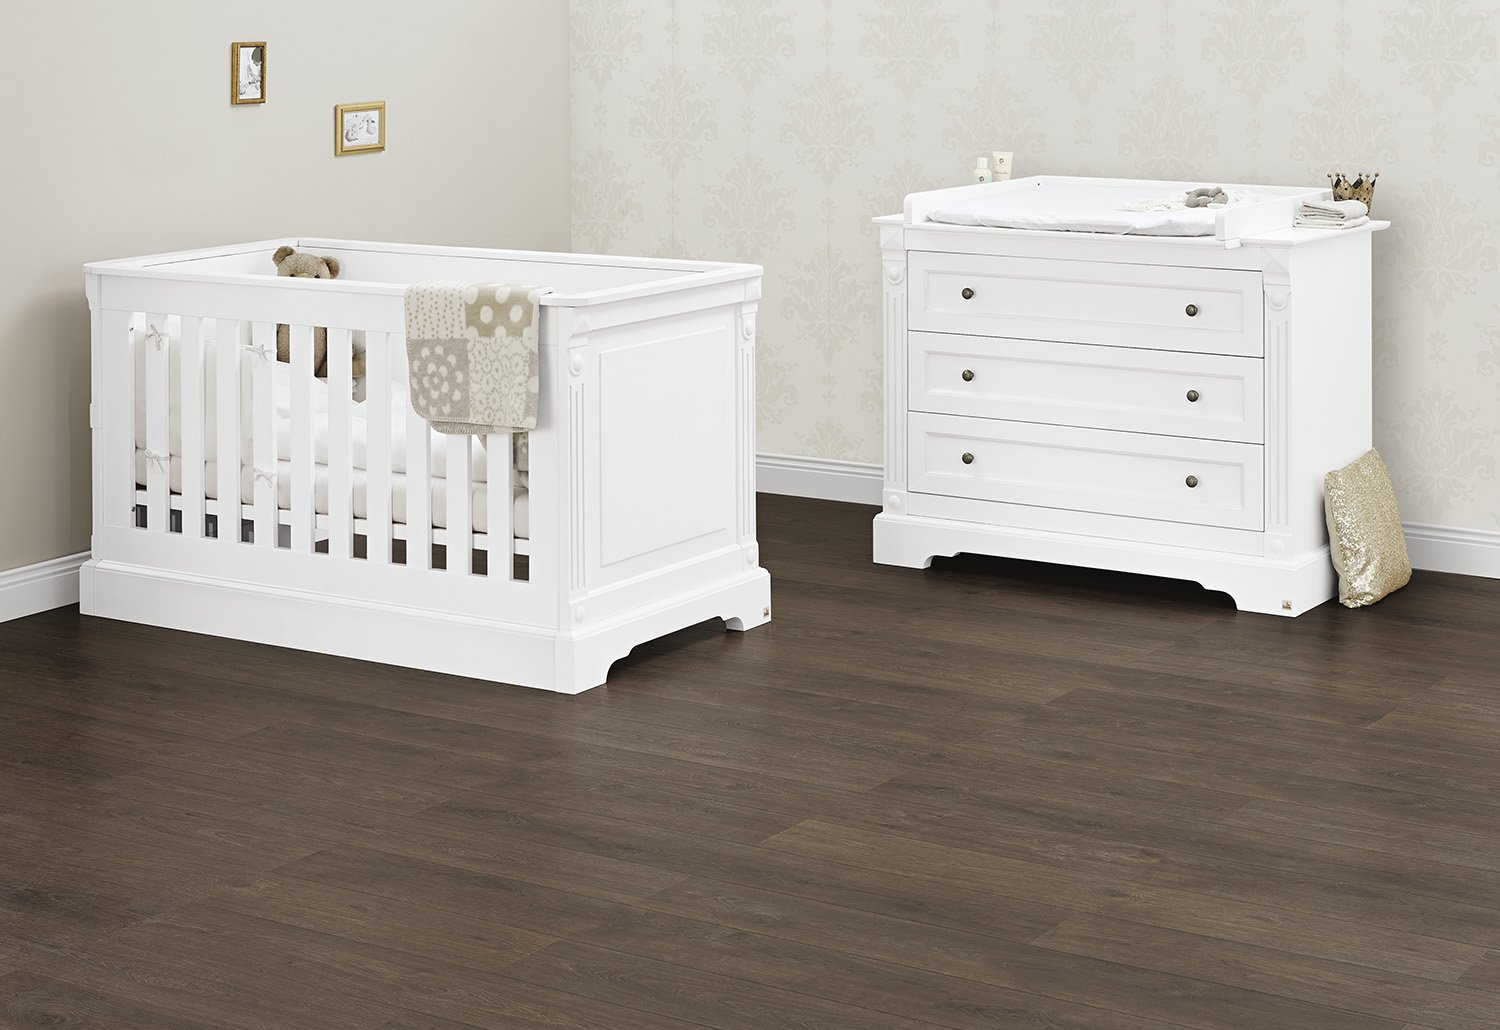 Pinolino Emilia Economy Set 2-Piece Cot (140 x 70 cm) and Wide Changing Table with Changing Unit White Matt (Item No. 09 34 67 B)